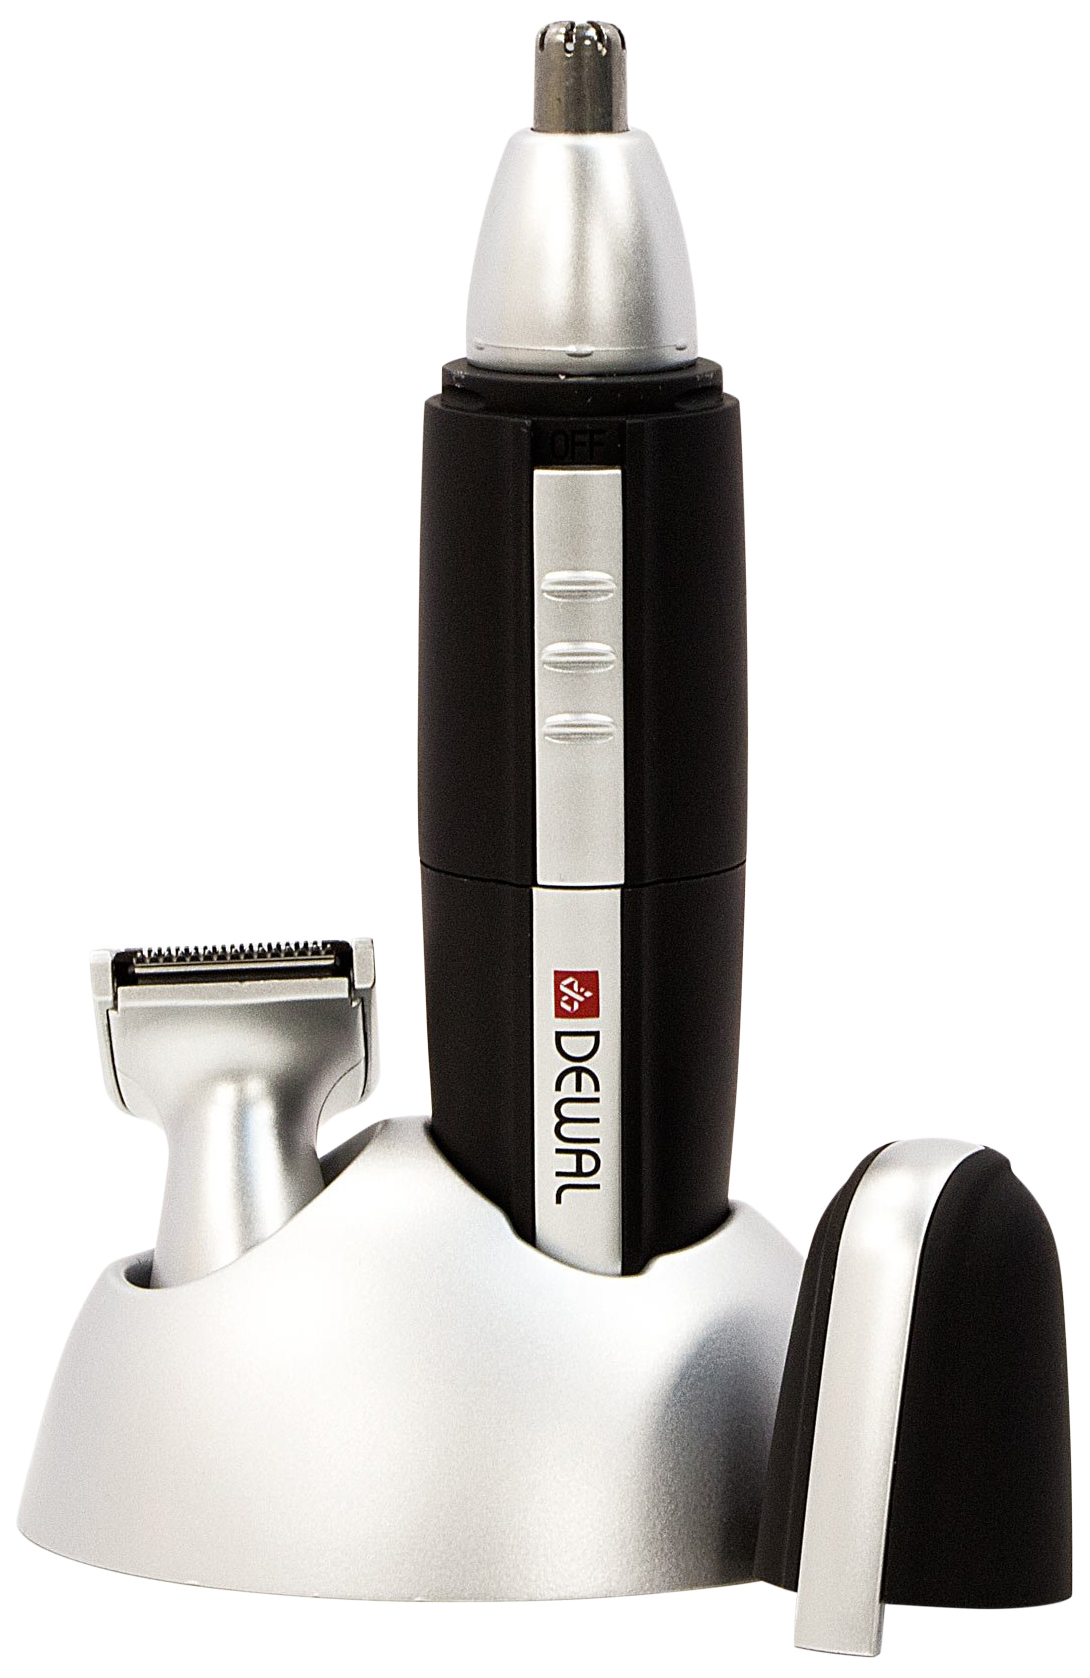 Триммер Dewal Nose&Ear 03-505 триммер showsee nose hairtrimmer c1 серый c1 gy